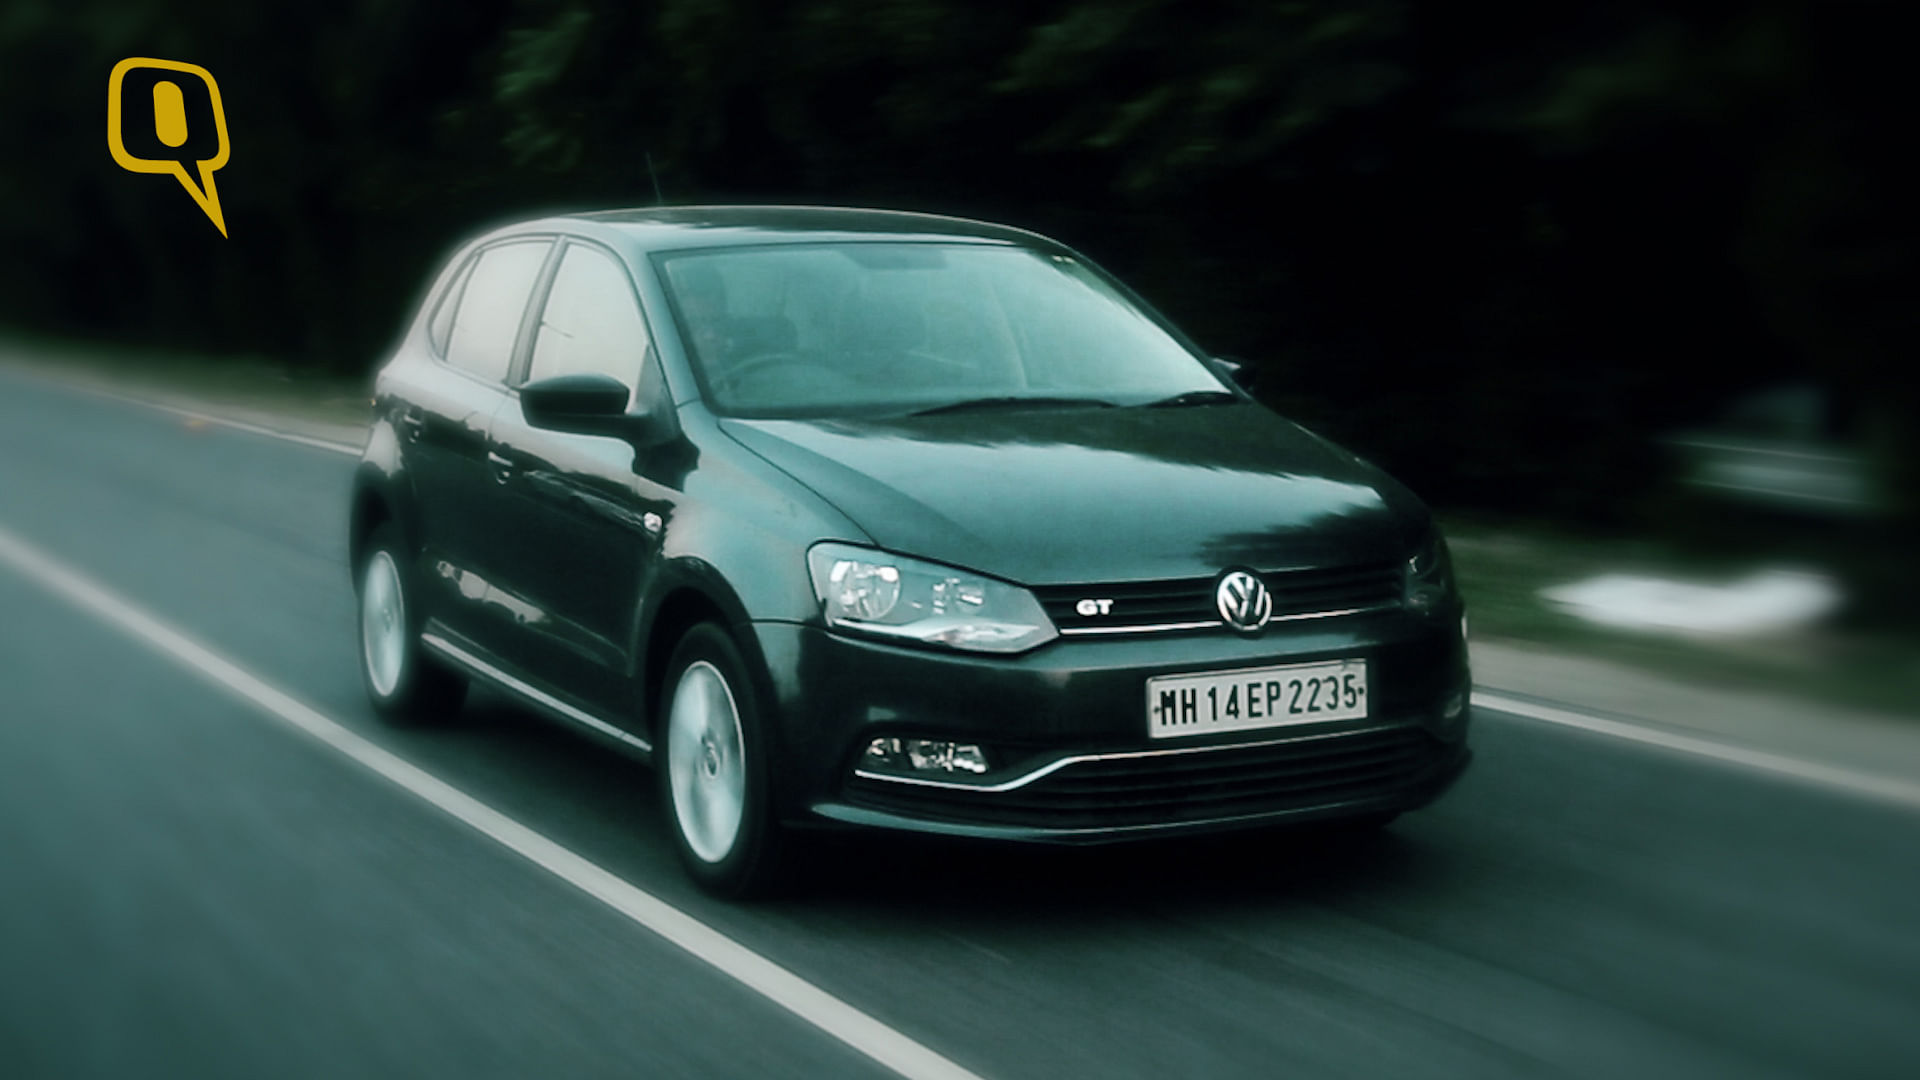 Volkswagen Polo GT TSI. (Photo: The Quint)